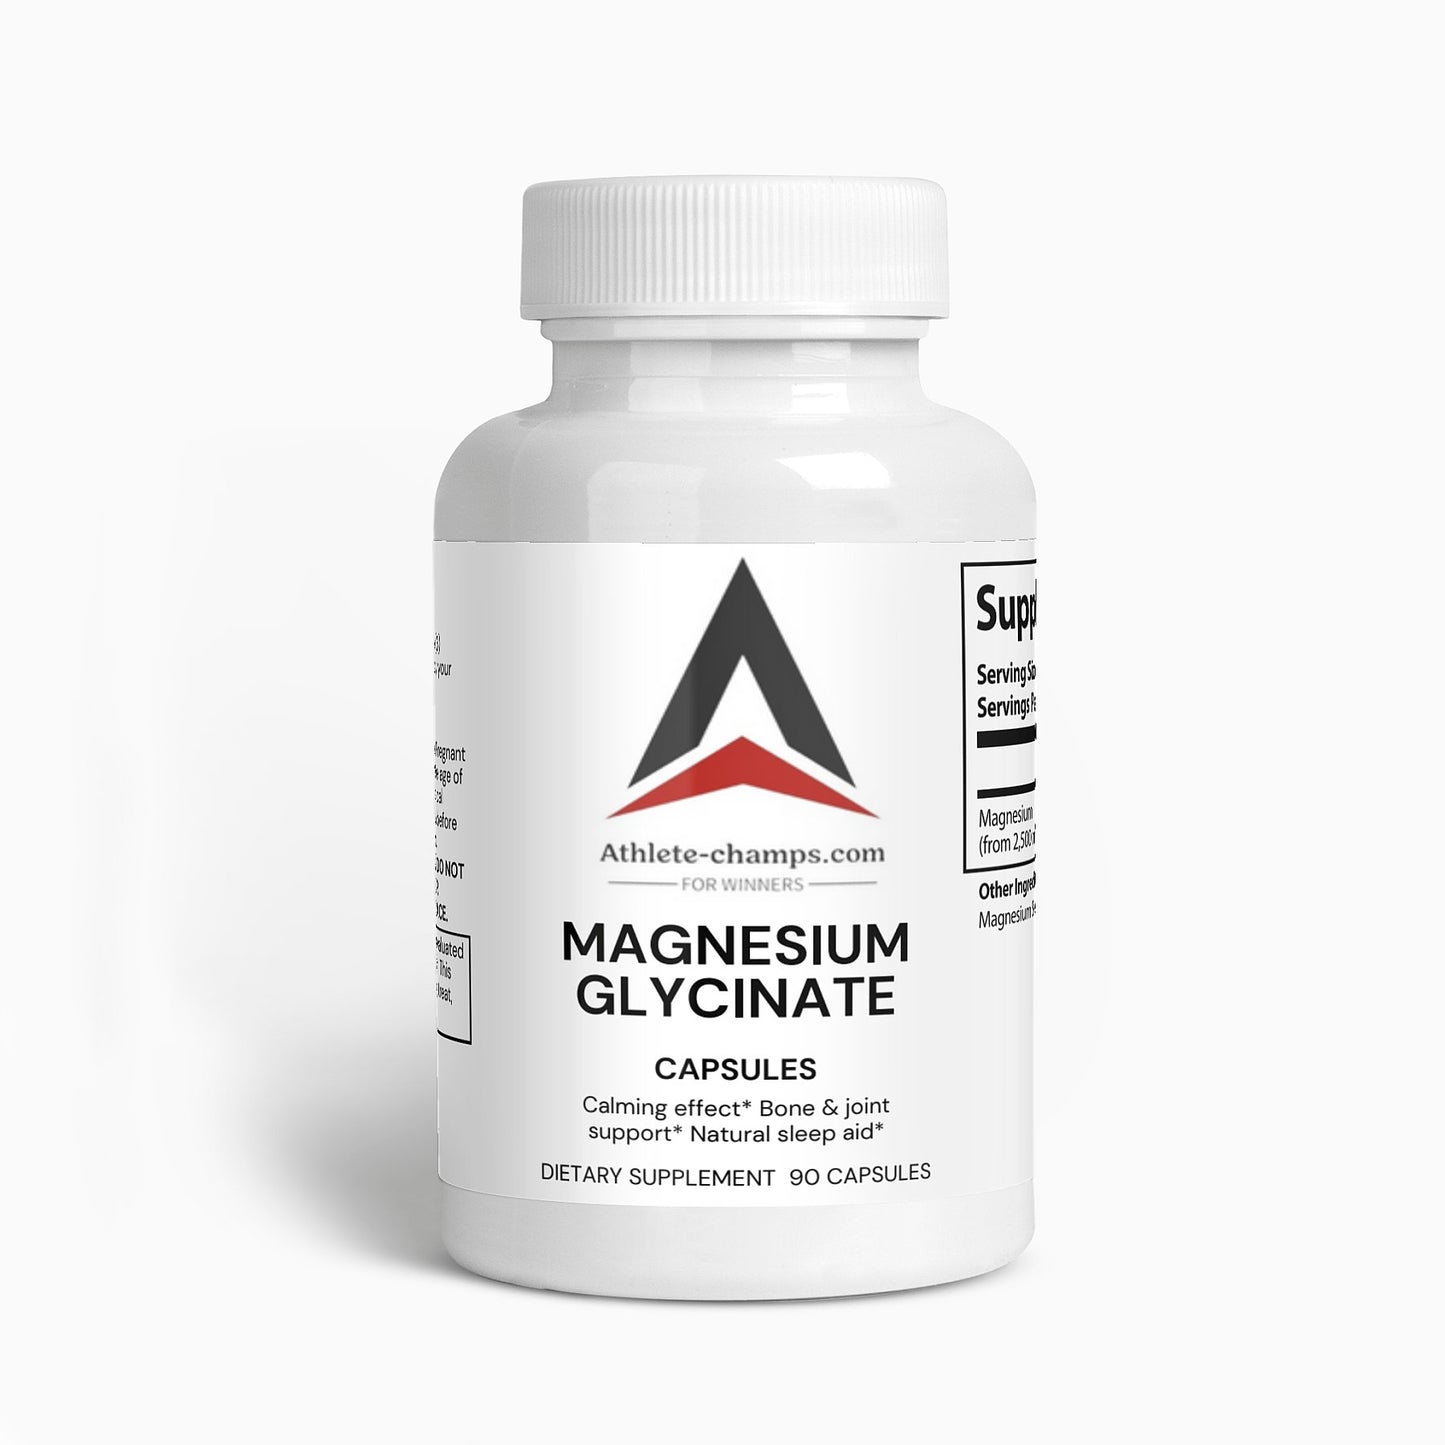 Magnesium Glycinate magnesium deficient and may need to Supplement